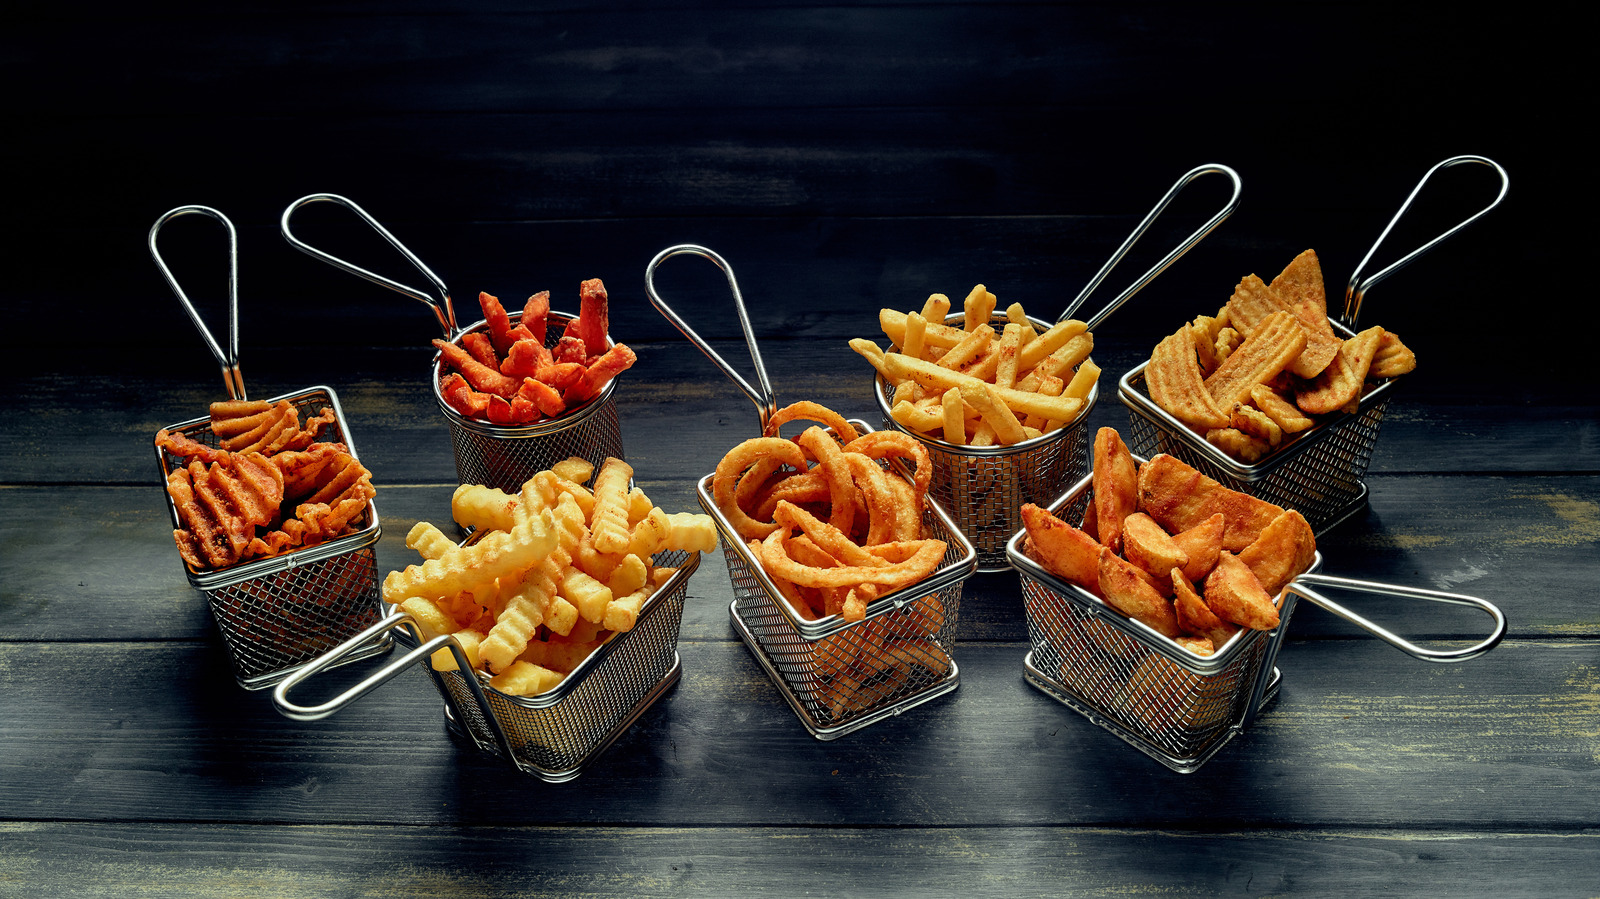 https://www.thedailymeal.com/img/gallery/13-different-fries-styles-you-should-know-about/l-intro-1673449692.jpg